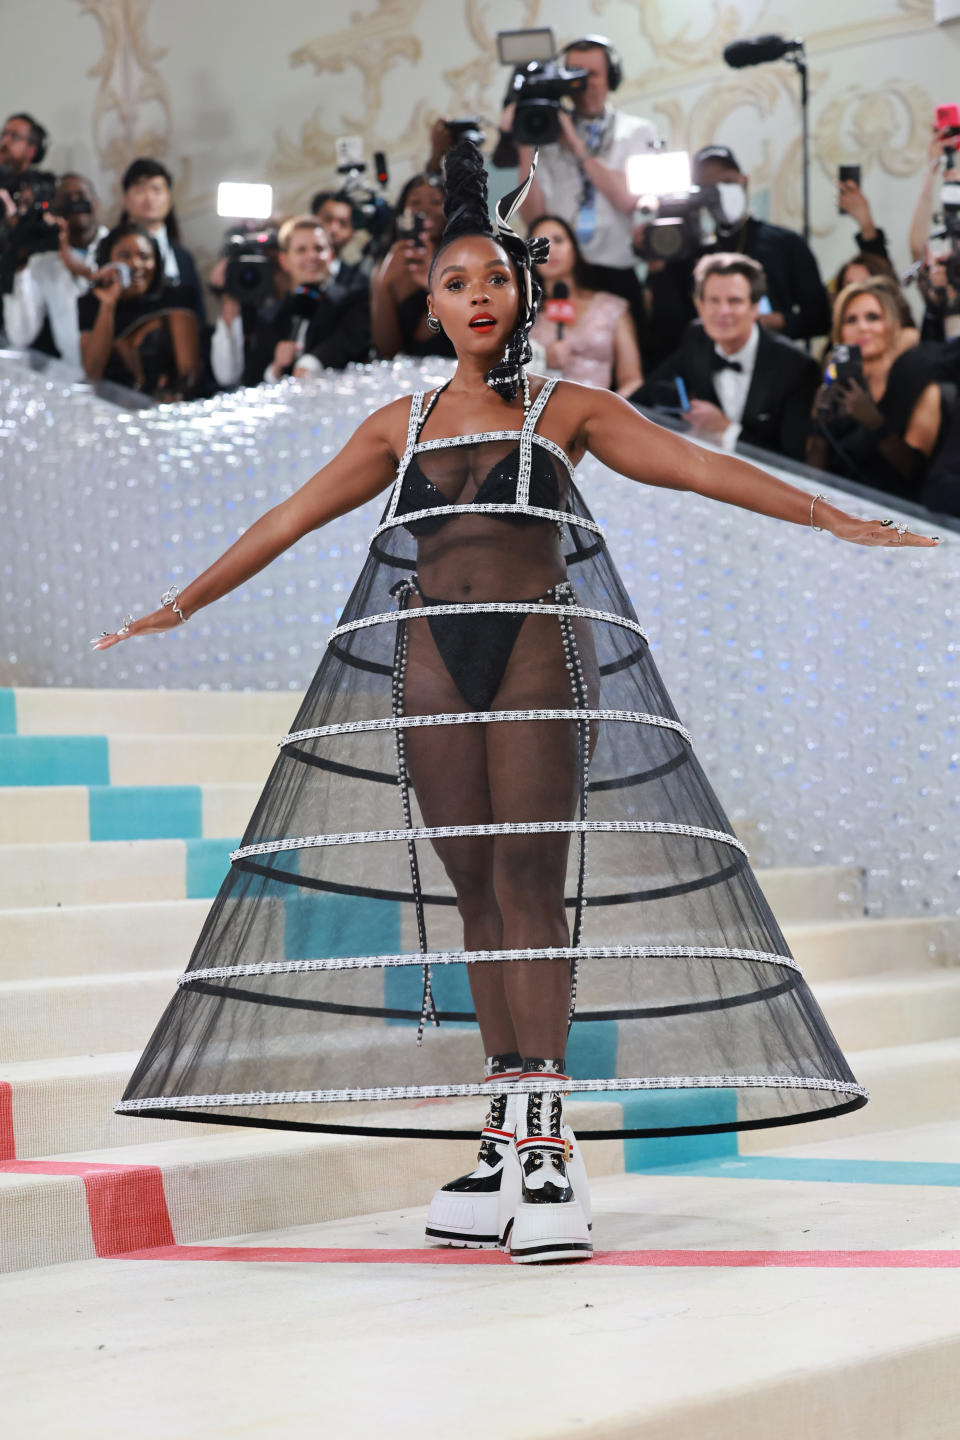 thom browne, sheer dresses trend, see-through style outfit fashion trends, NEW YORK, NEW YORK - MAY 01: Janelle Monáe attends The 2023 Met Gala Celebrating "Karl Lagerfeld: A Line Of Beauty" at The Metropolitan Museum of Art on May 01, 2023 in New York City. (Photo by Theo Wargo/Getty Images for Karl Lagerfeld)